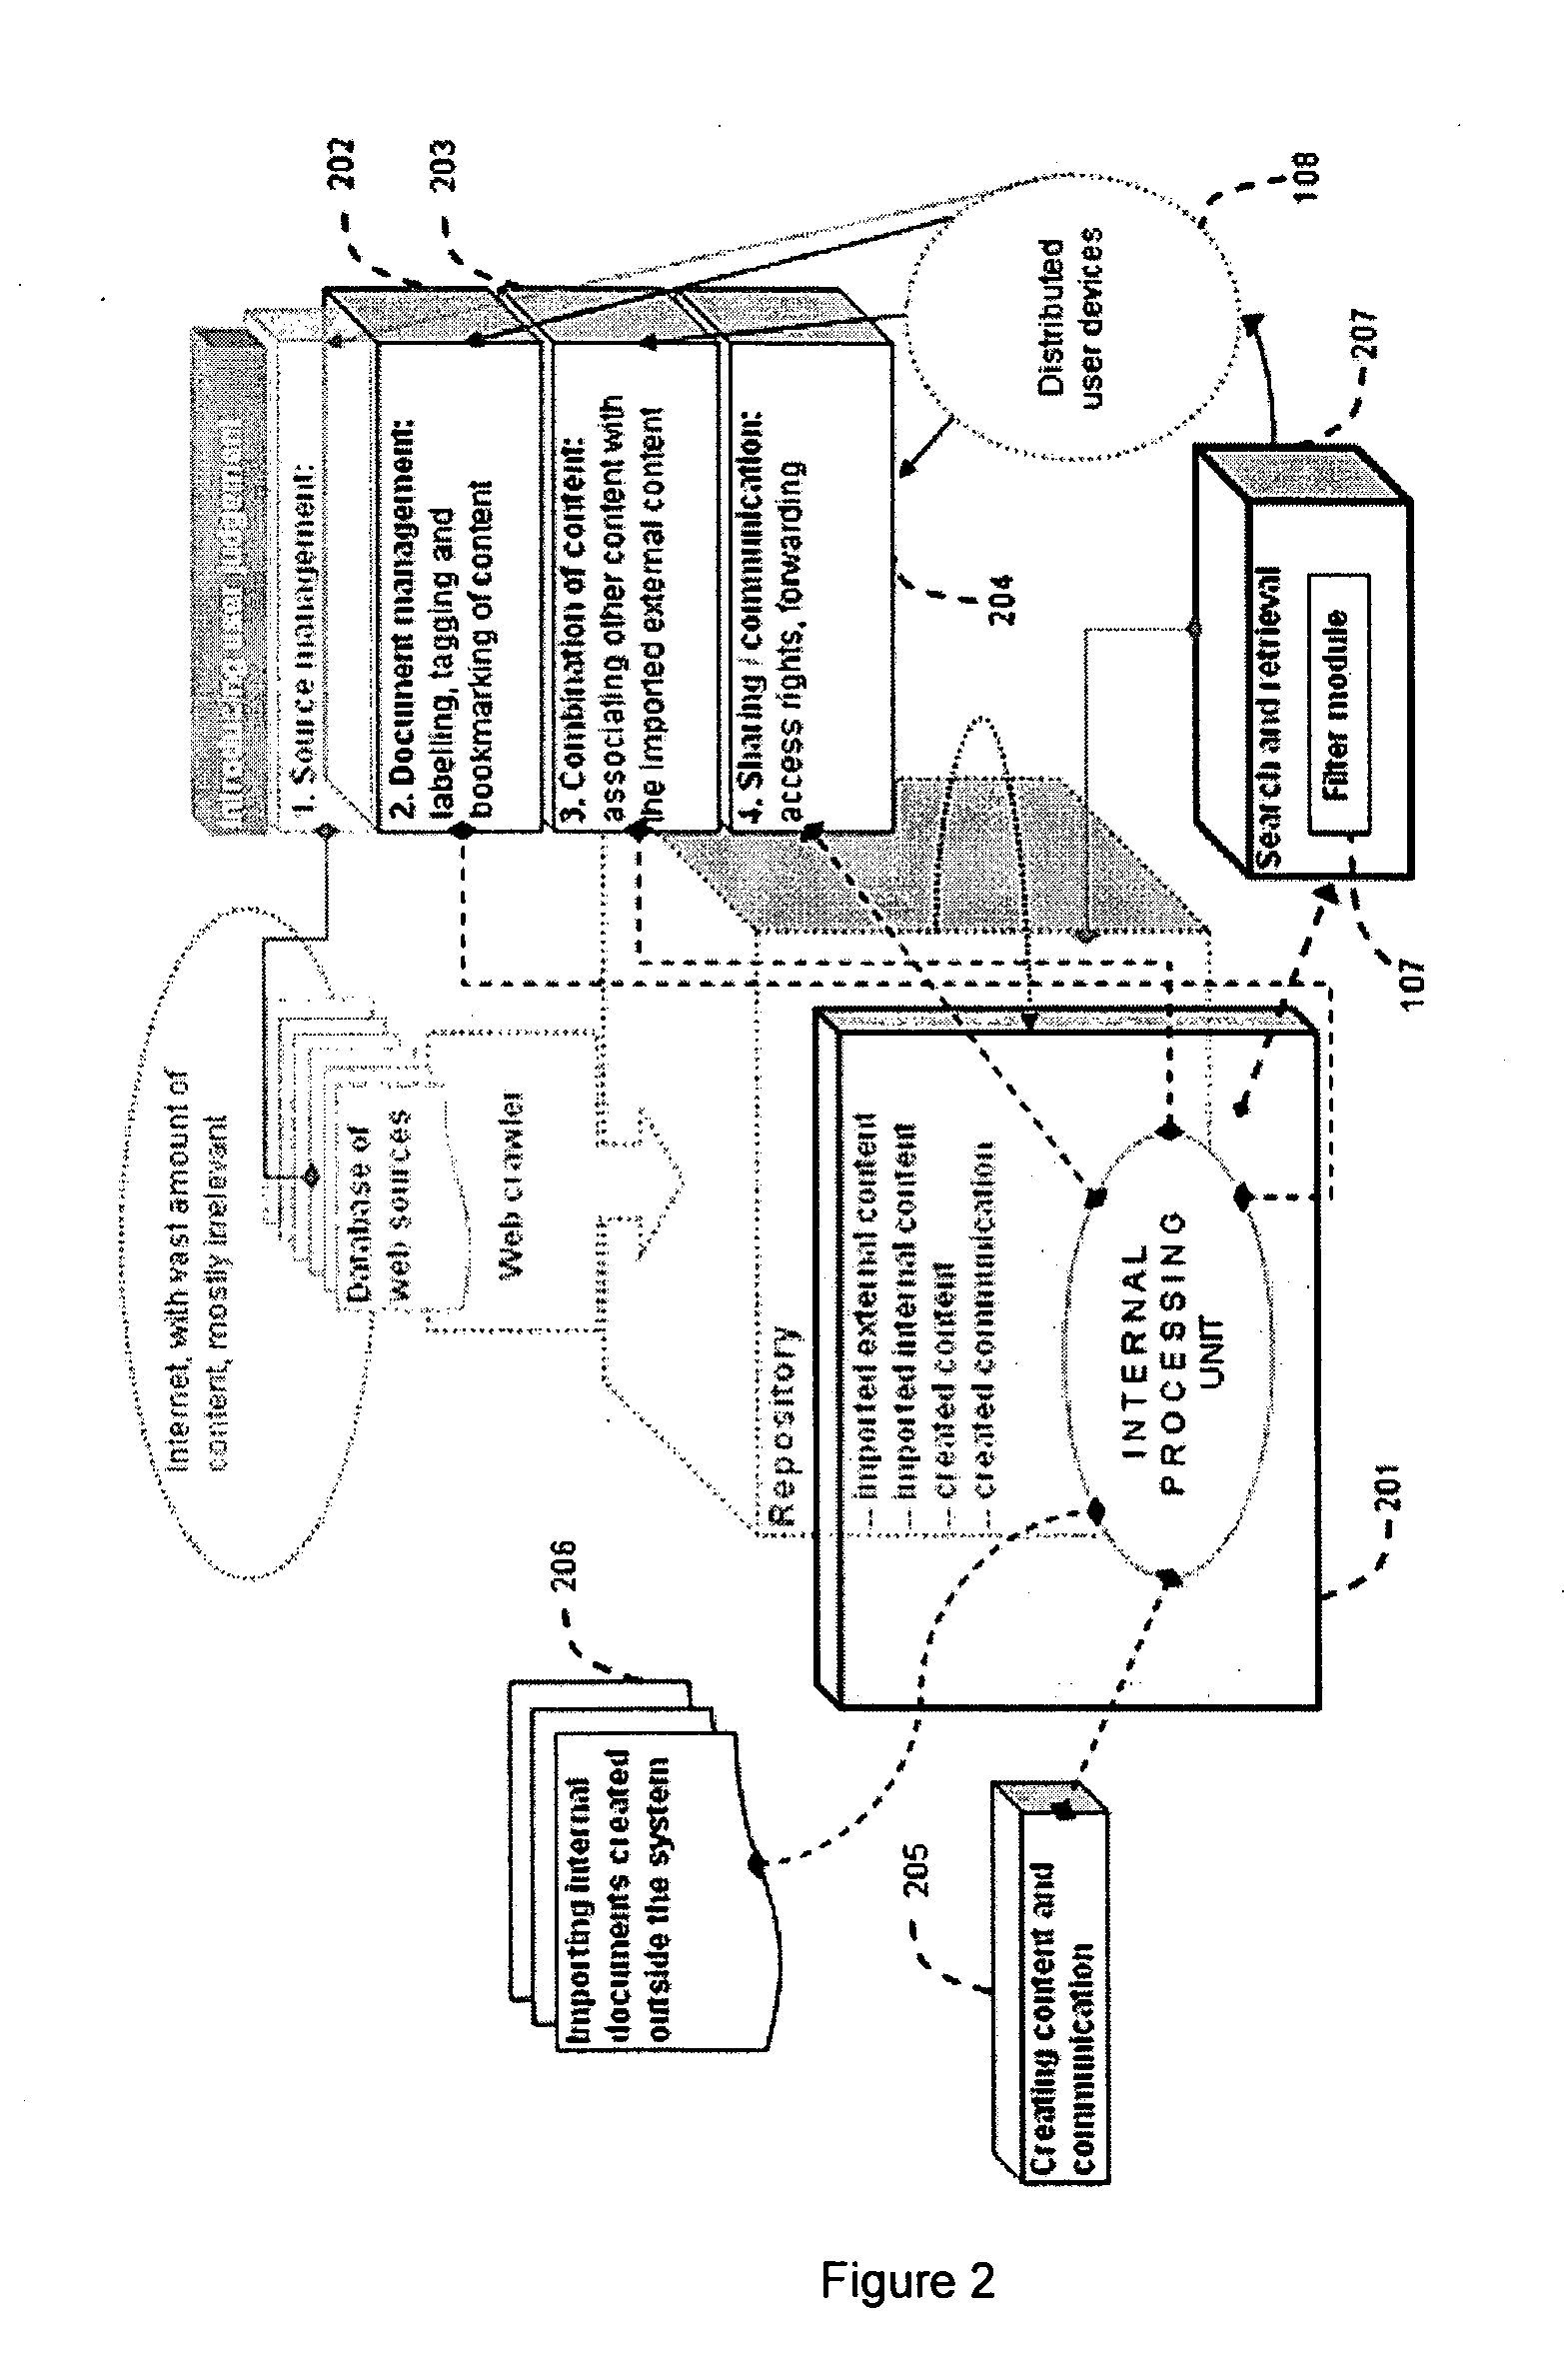 Method and system for enhancing the relevance and usefulness of search results, such as those of web searches, through the application of user's judgment